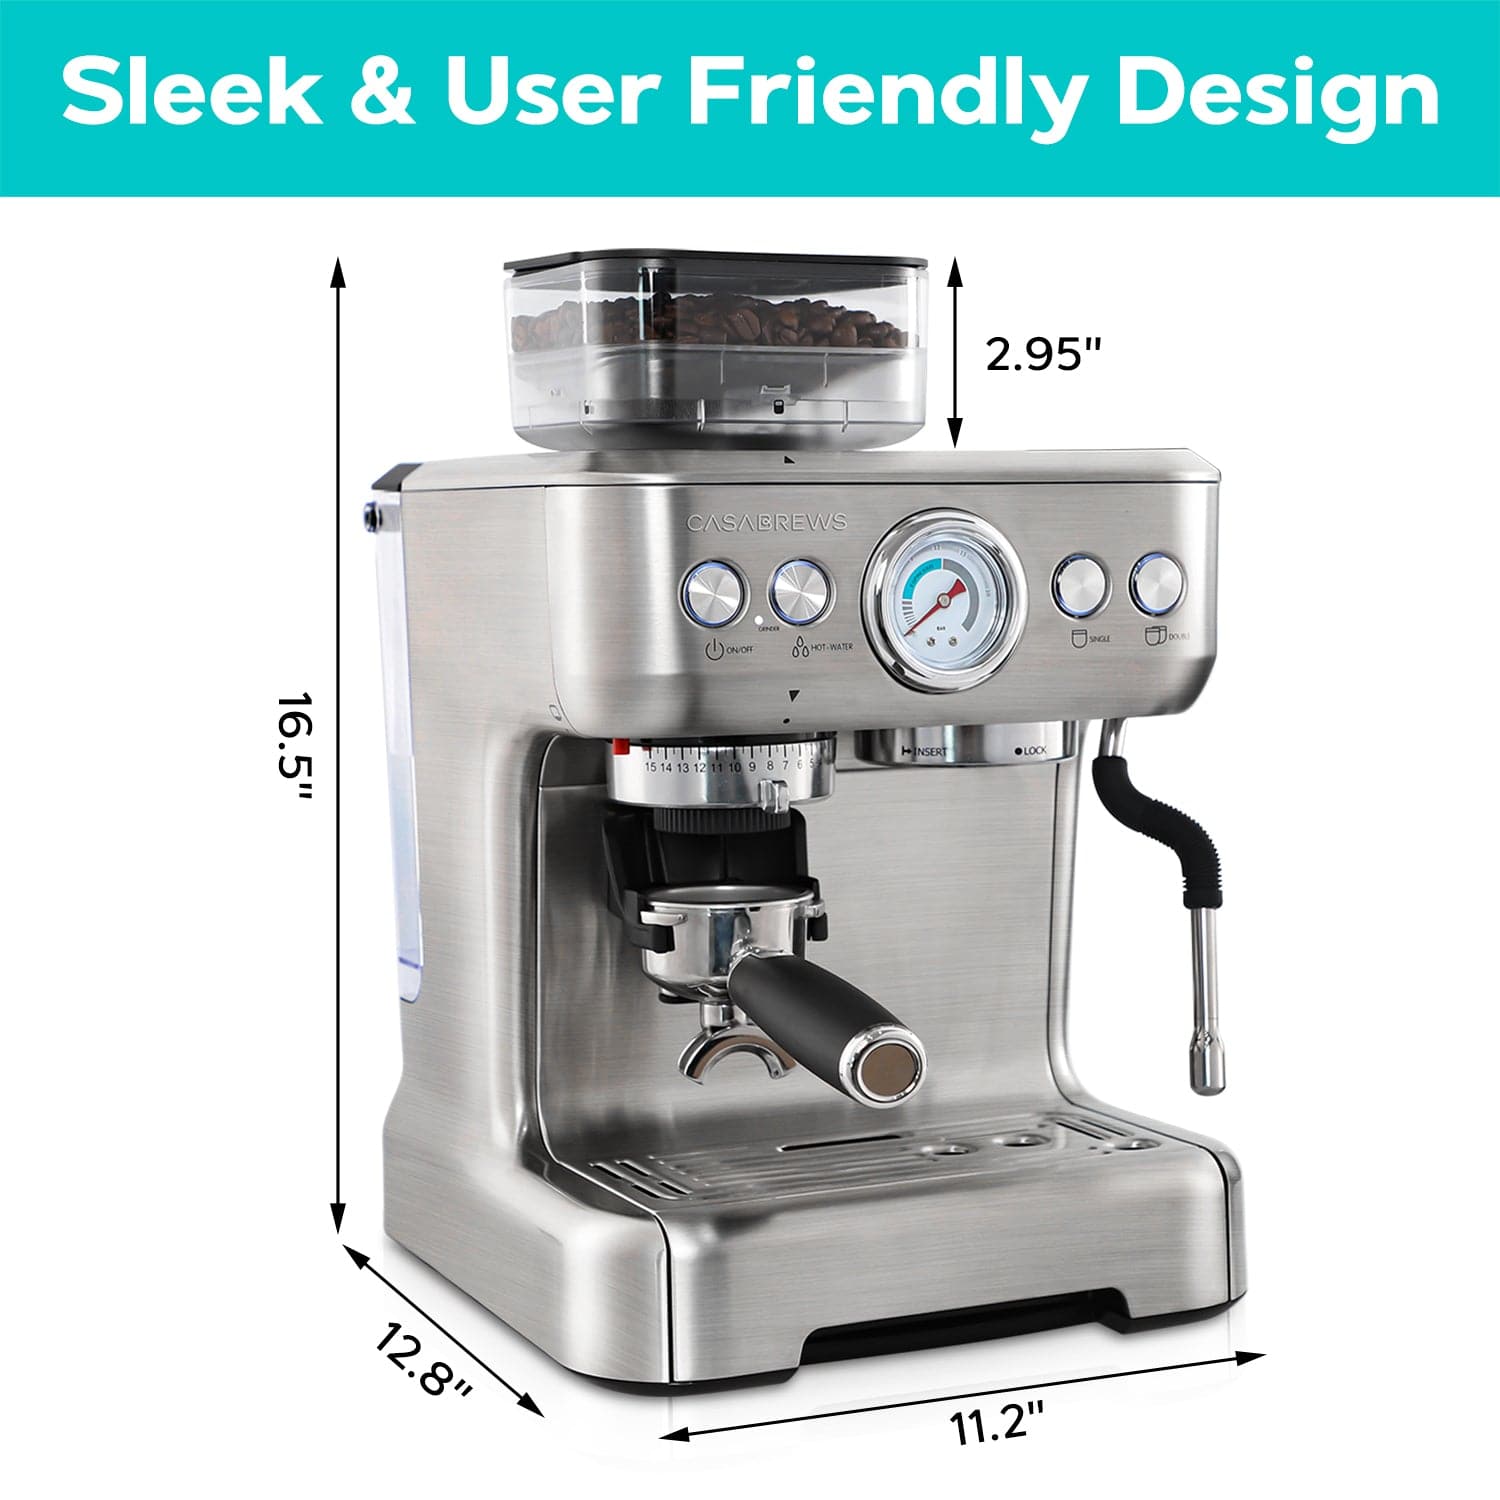 Casabrews 5700Gense™ All-in-One Espresso Machine with Grinding Memory Function